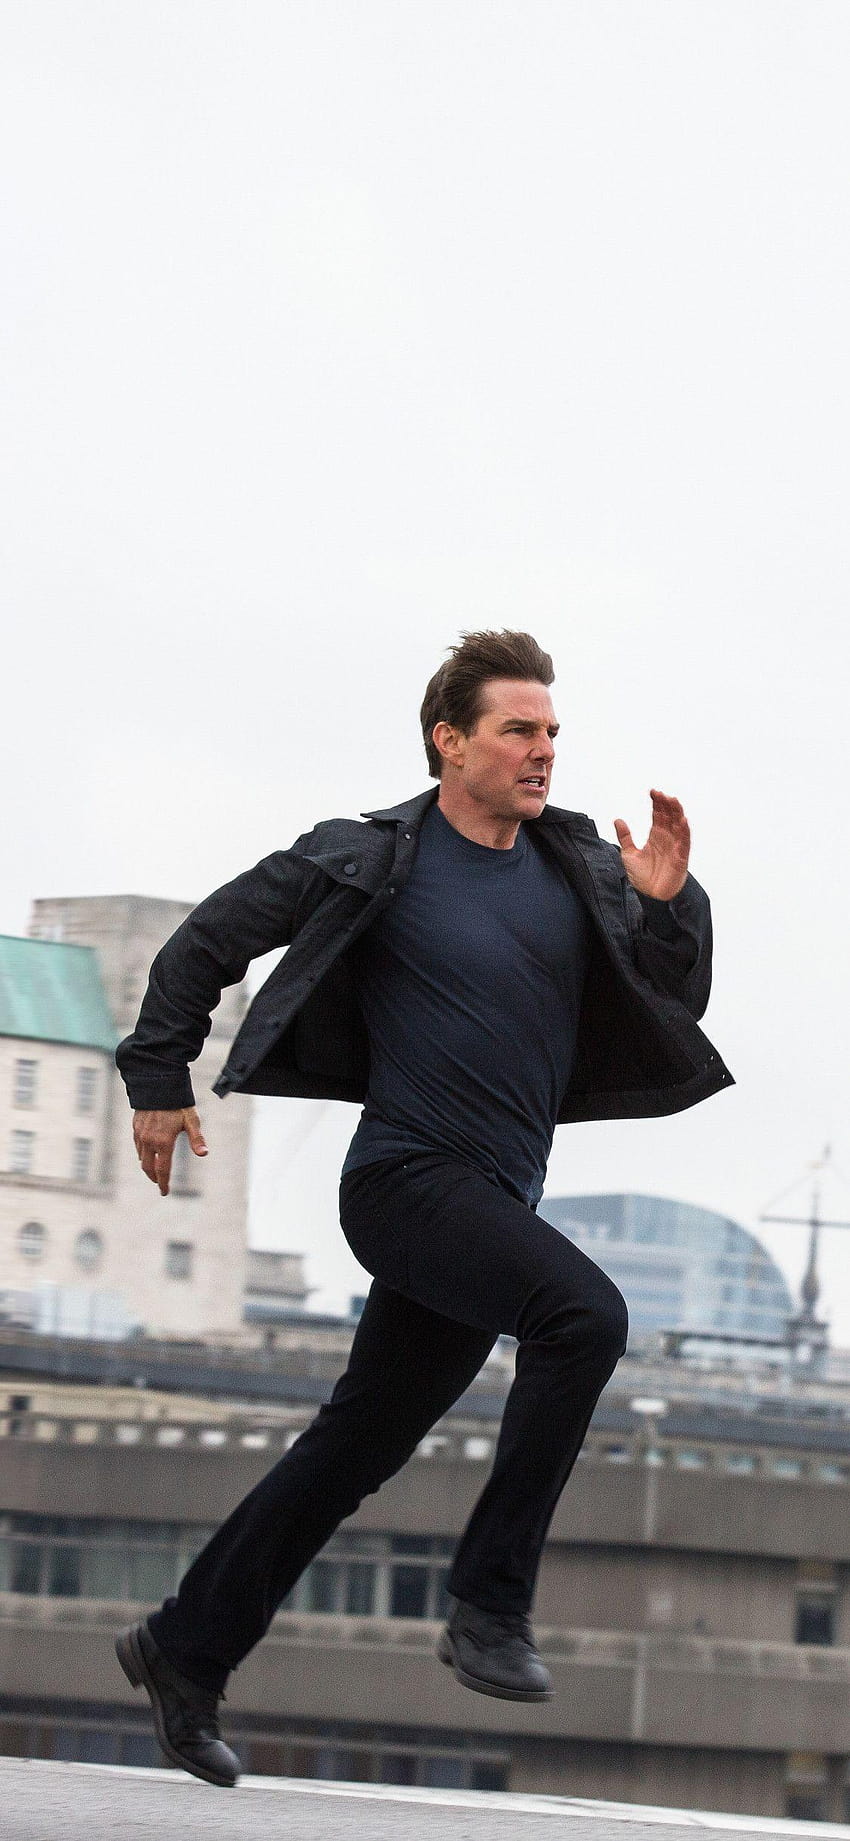 1125x2436 Tom Cruise Läuft Mission Impossible Fallout Iphone XS, Mission Impossible iPhone HD-Handy-Hintergrundbild